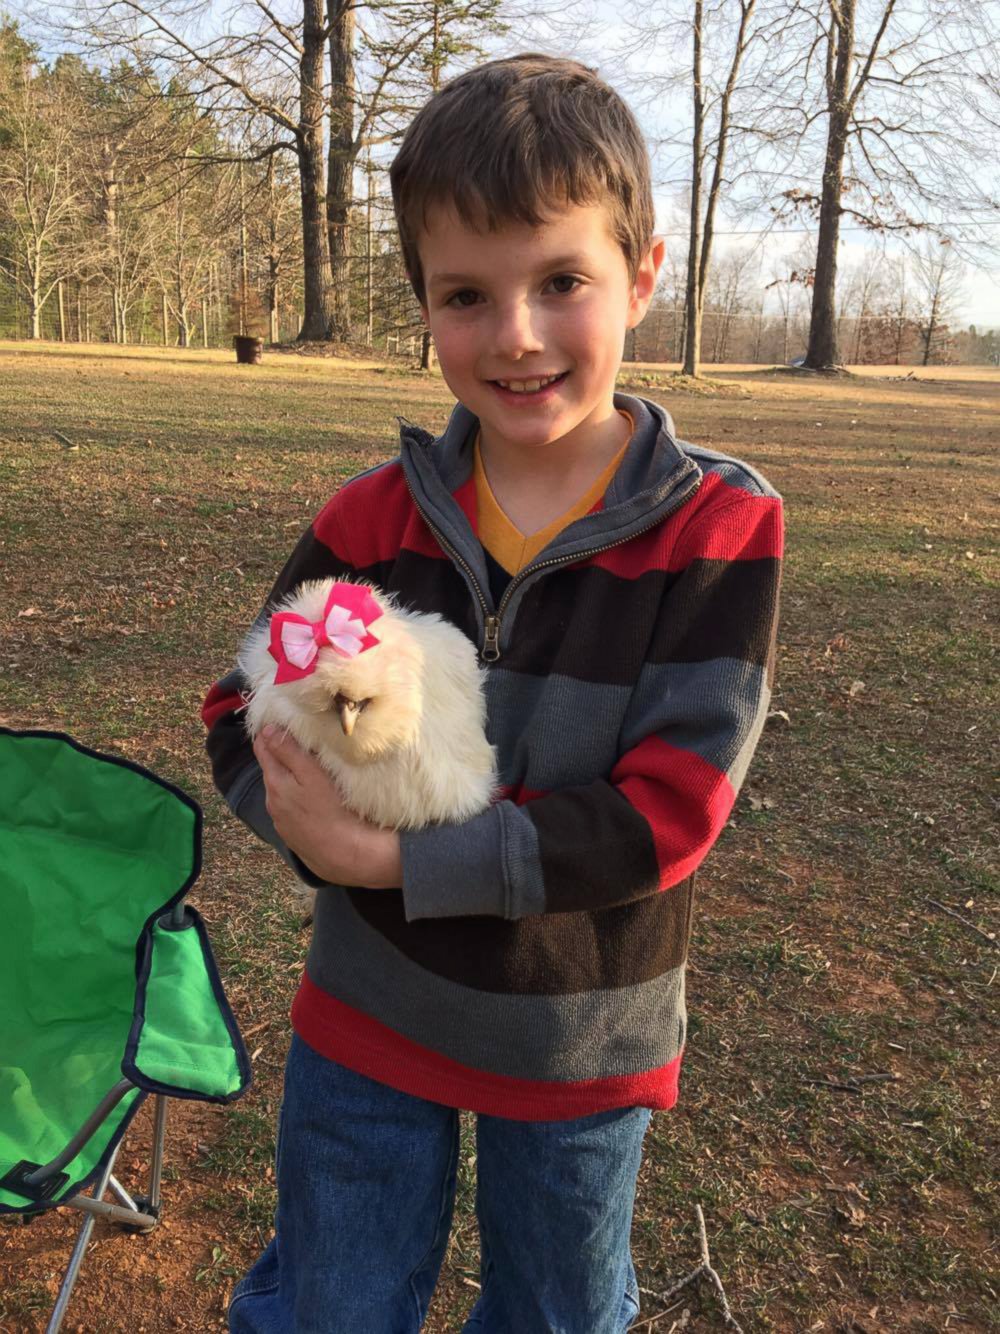 PHOTO: Finn Proctor, 7, adopted Darla, his therapy chicken that is helping to educate his community about humane treatment of animals.